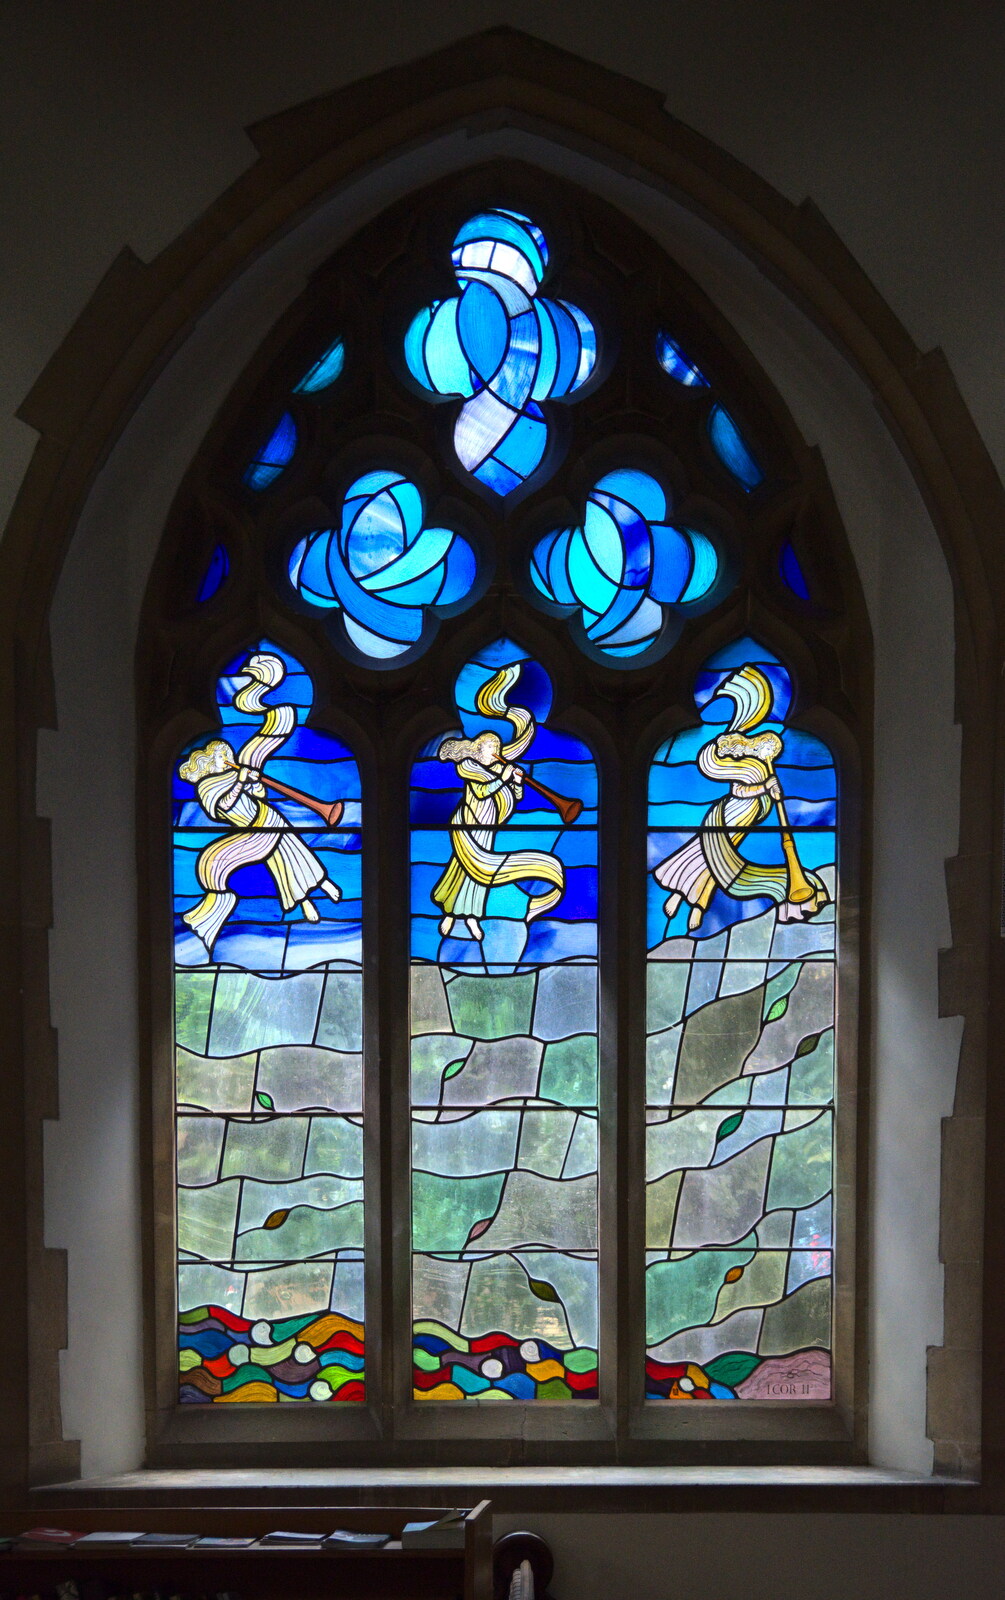 Lunch in Harleston, Norfolk - 1st March 2023: Nice modern stained glass in St. John's